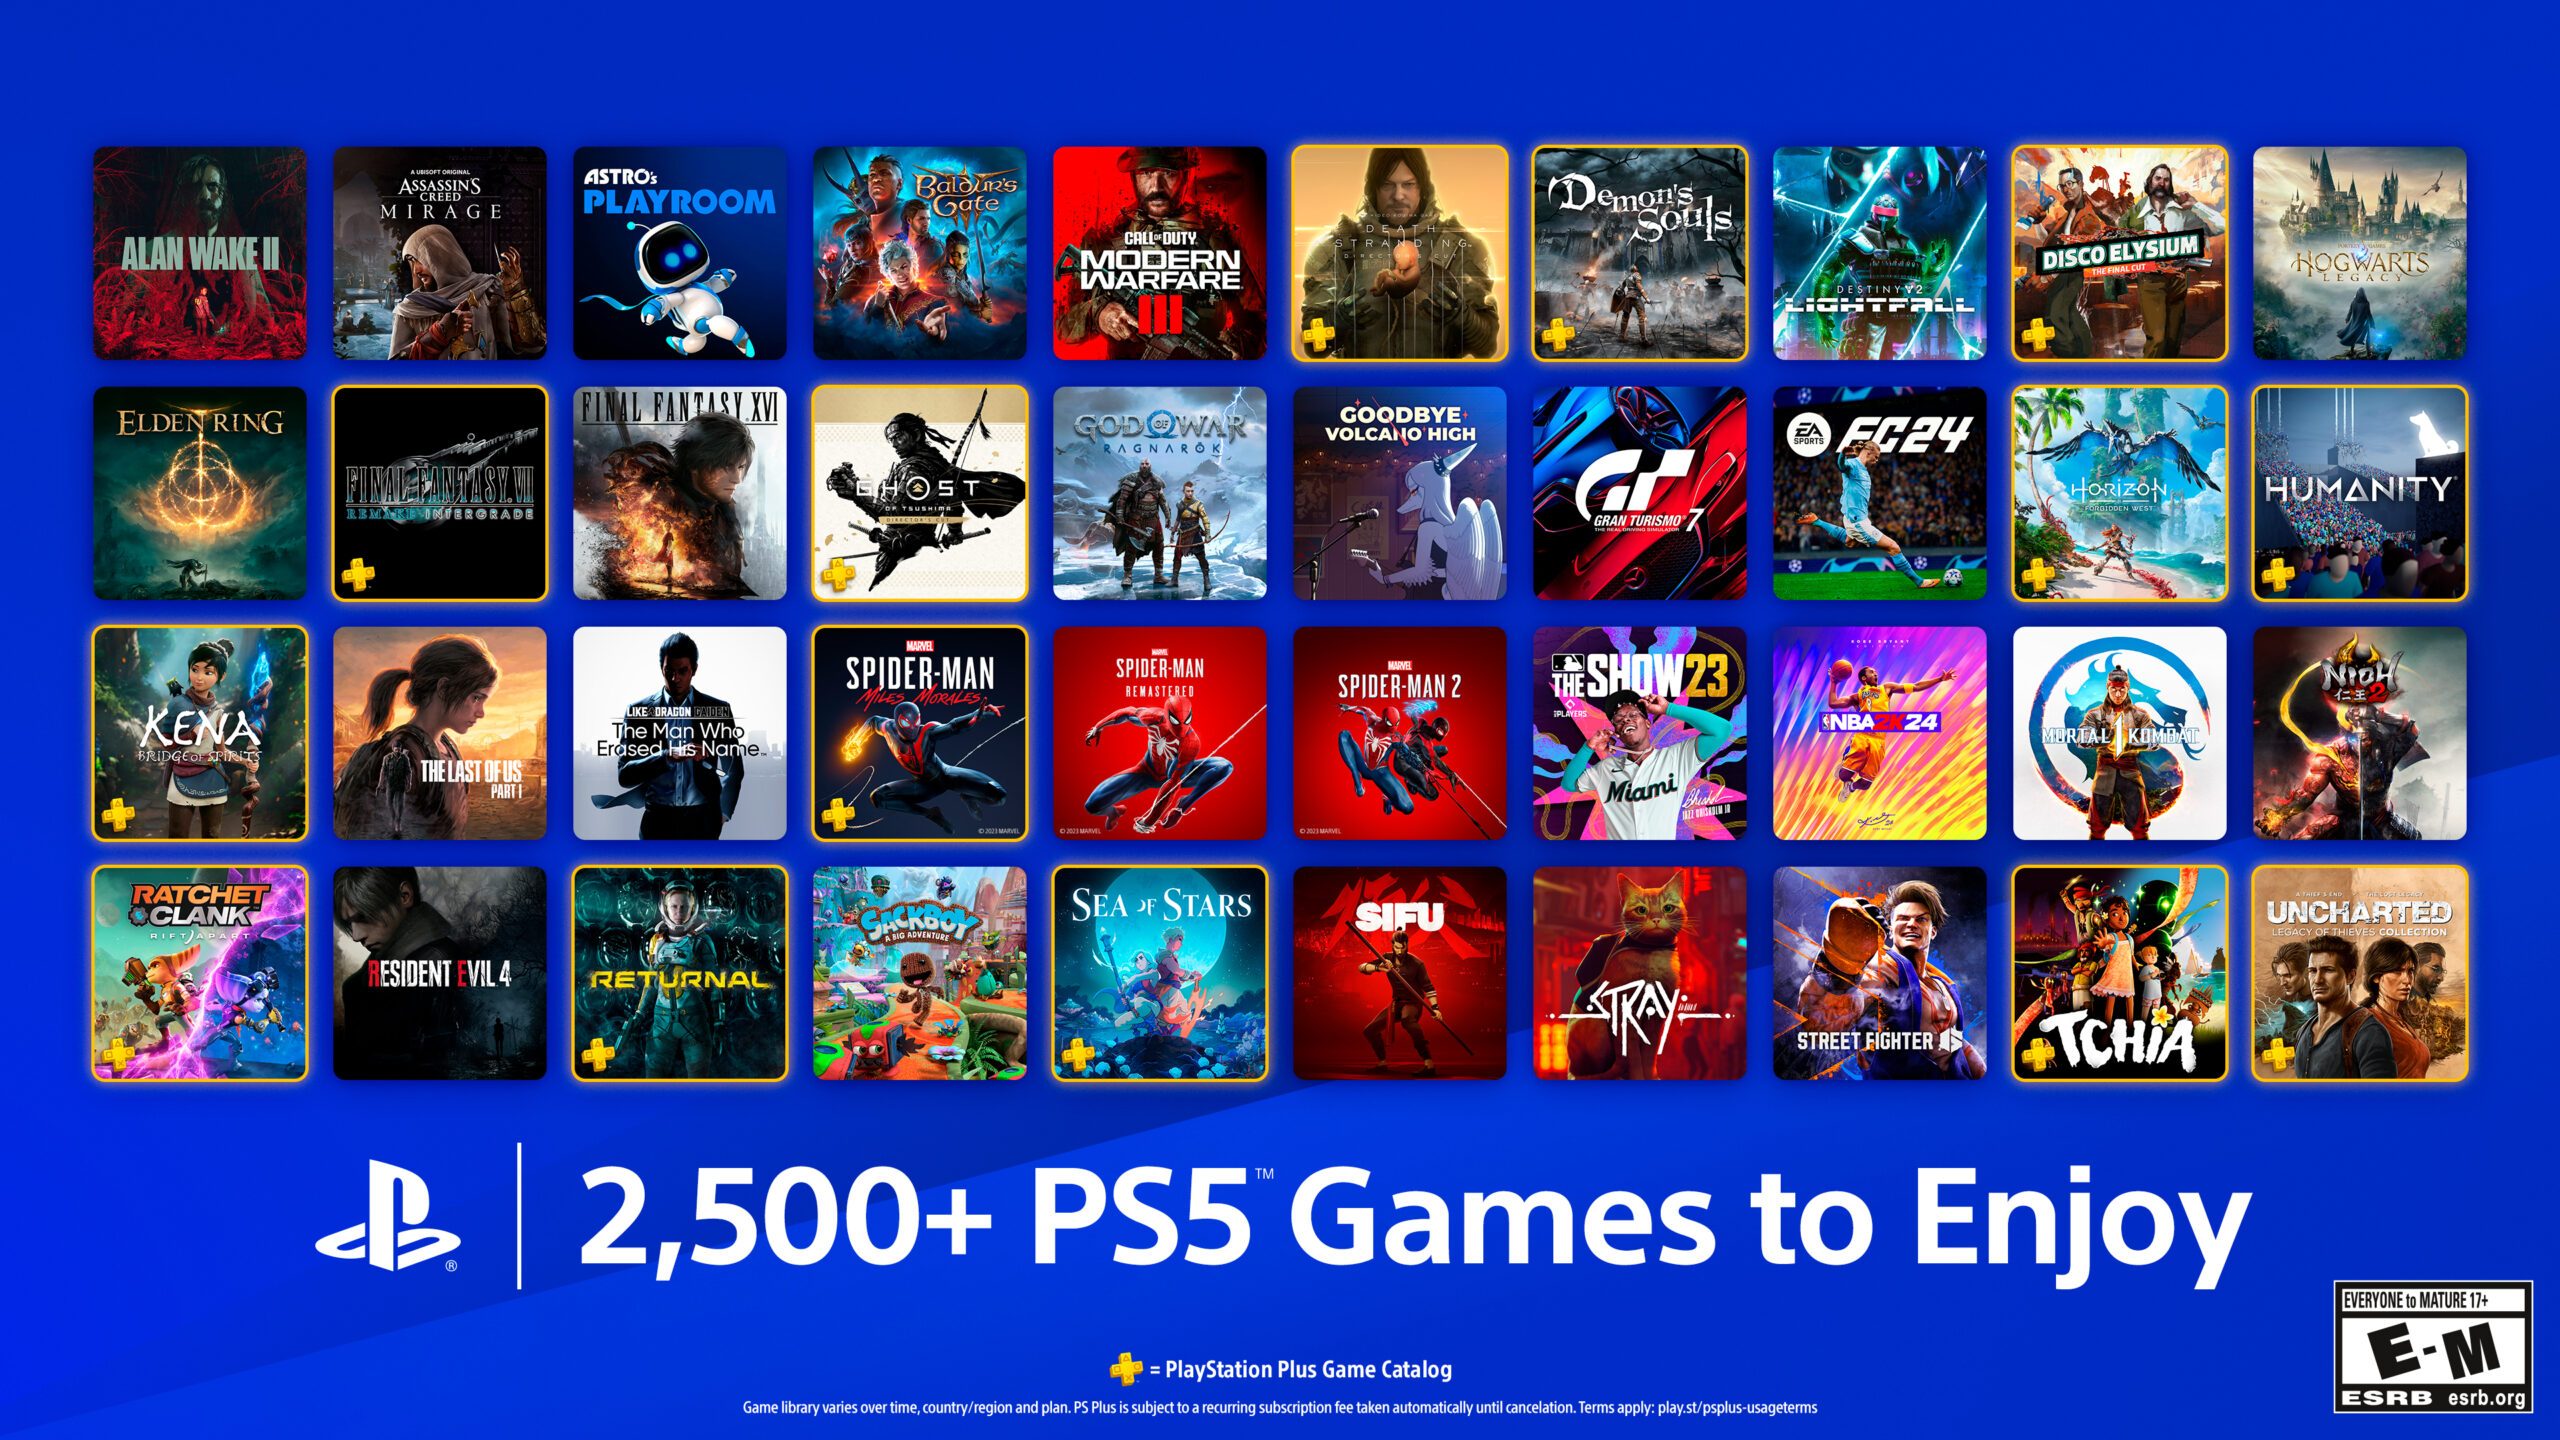 Celebrating the holiday season with blockbuster games, new hardware  products, and more PS5 console inventory than ever before – PlayStation.Blog